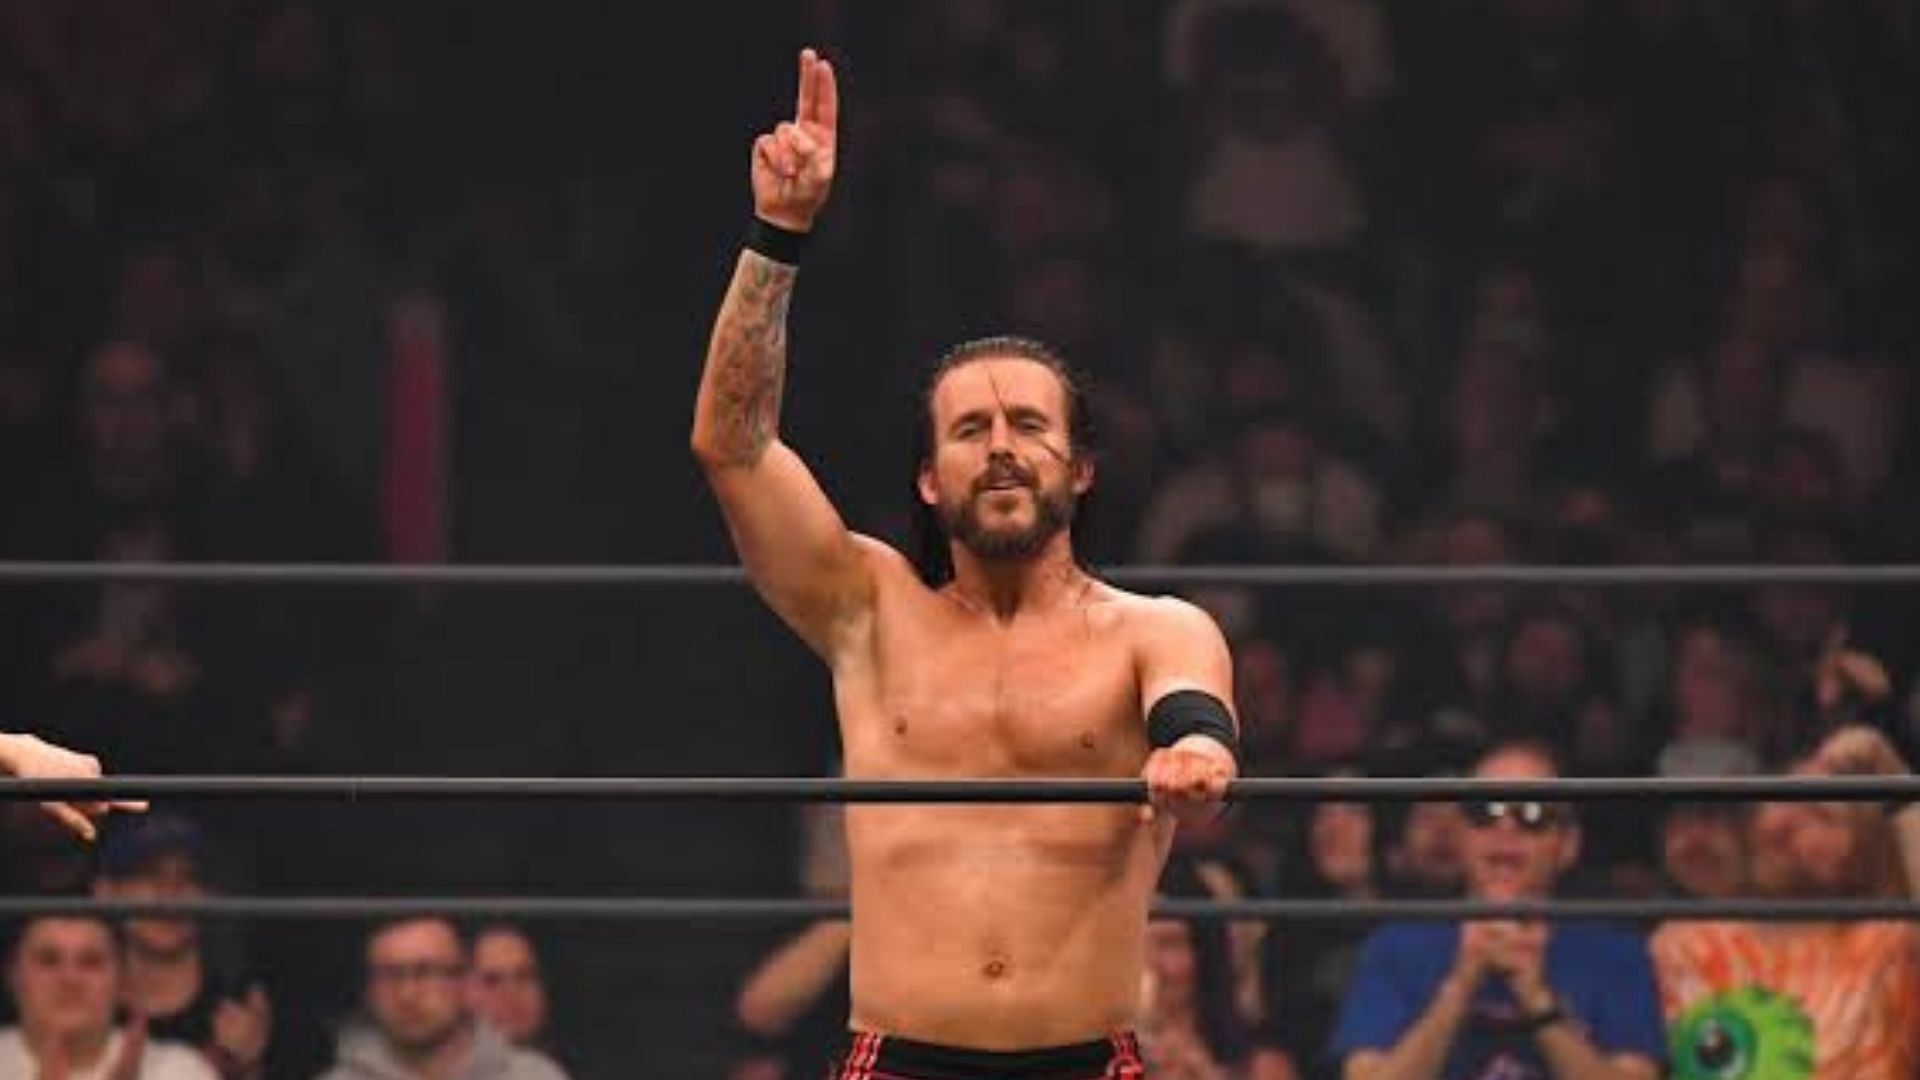 Adam Cole is a former NXT Champion.